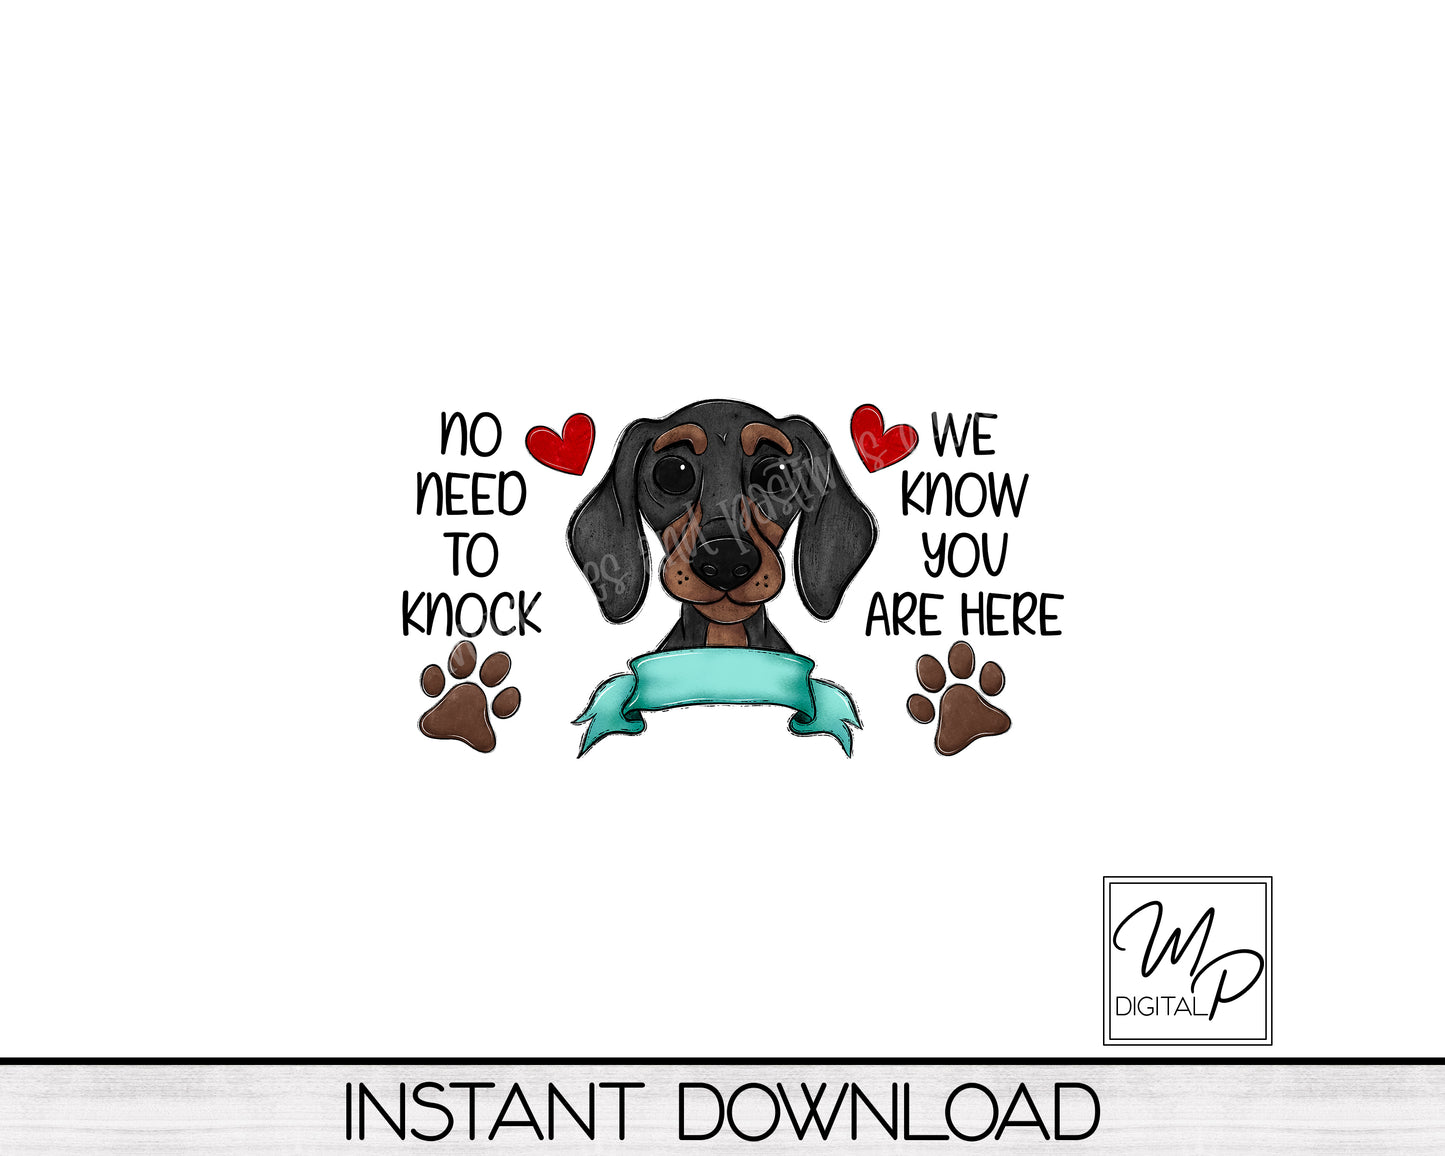 Dachshund Door Mat Design for Sublimation, No Need To Knock, Digital Download